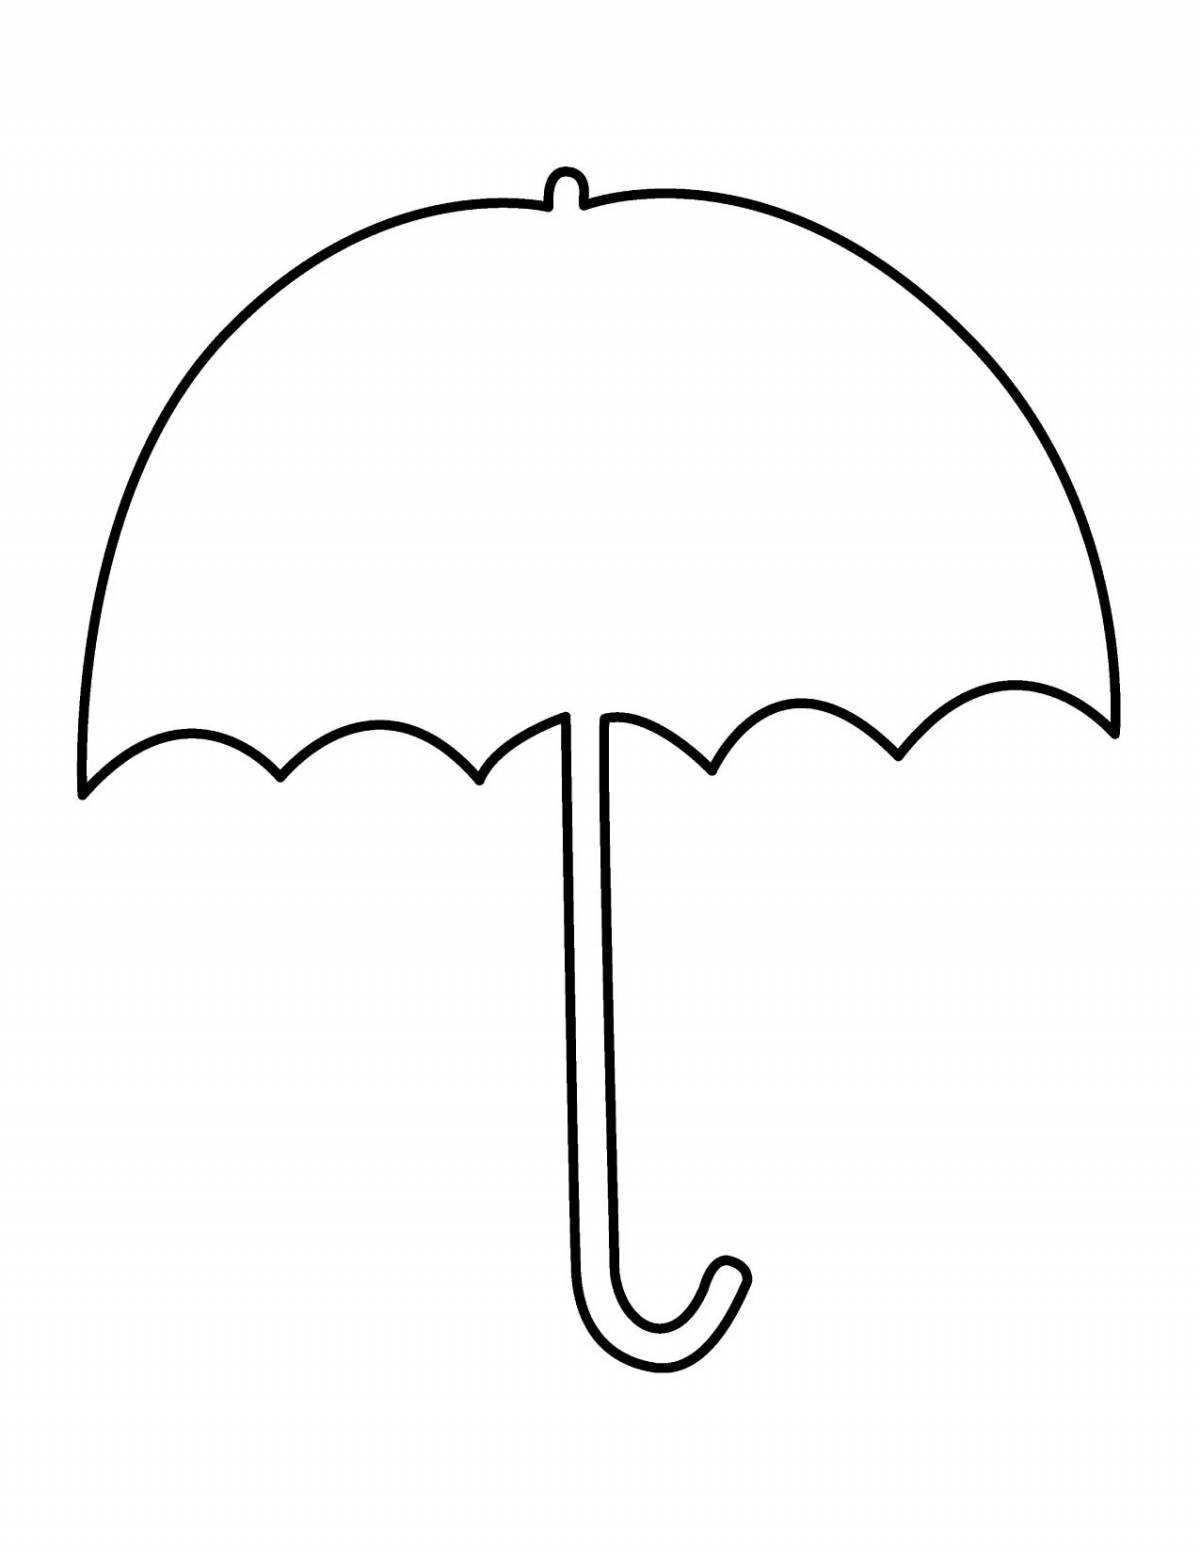 Coloring rainbow umbrella for 4-5 year olds